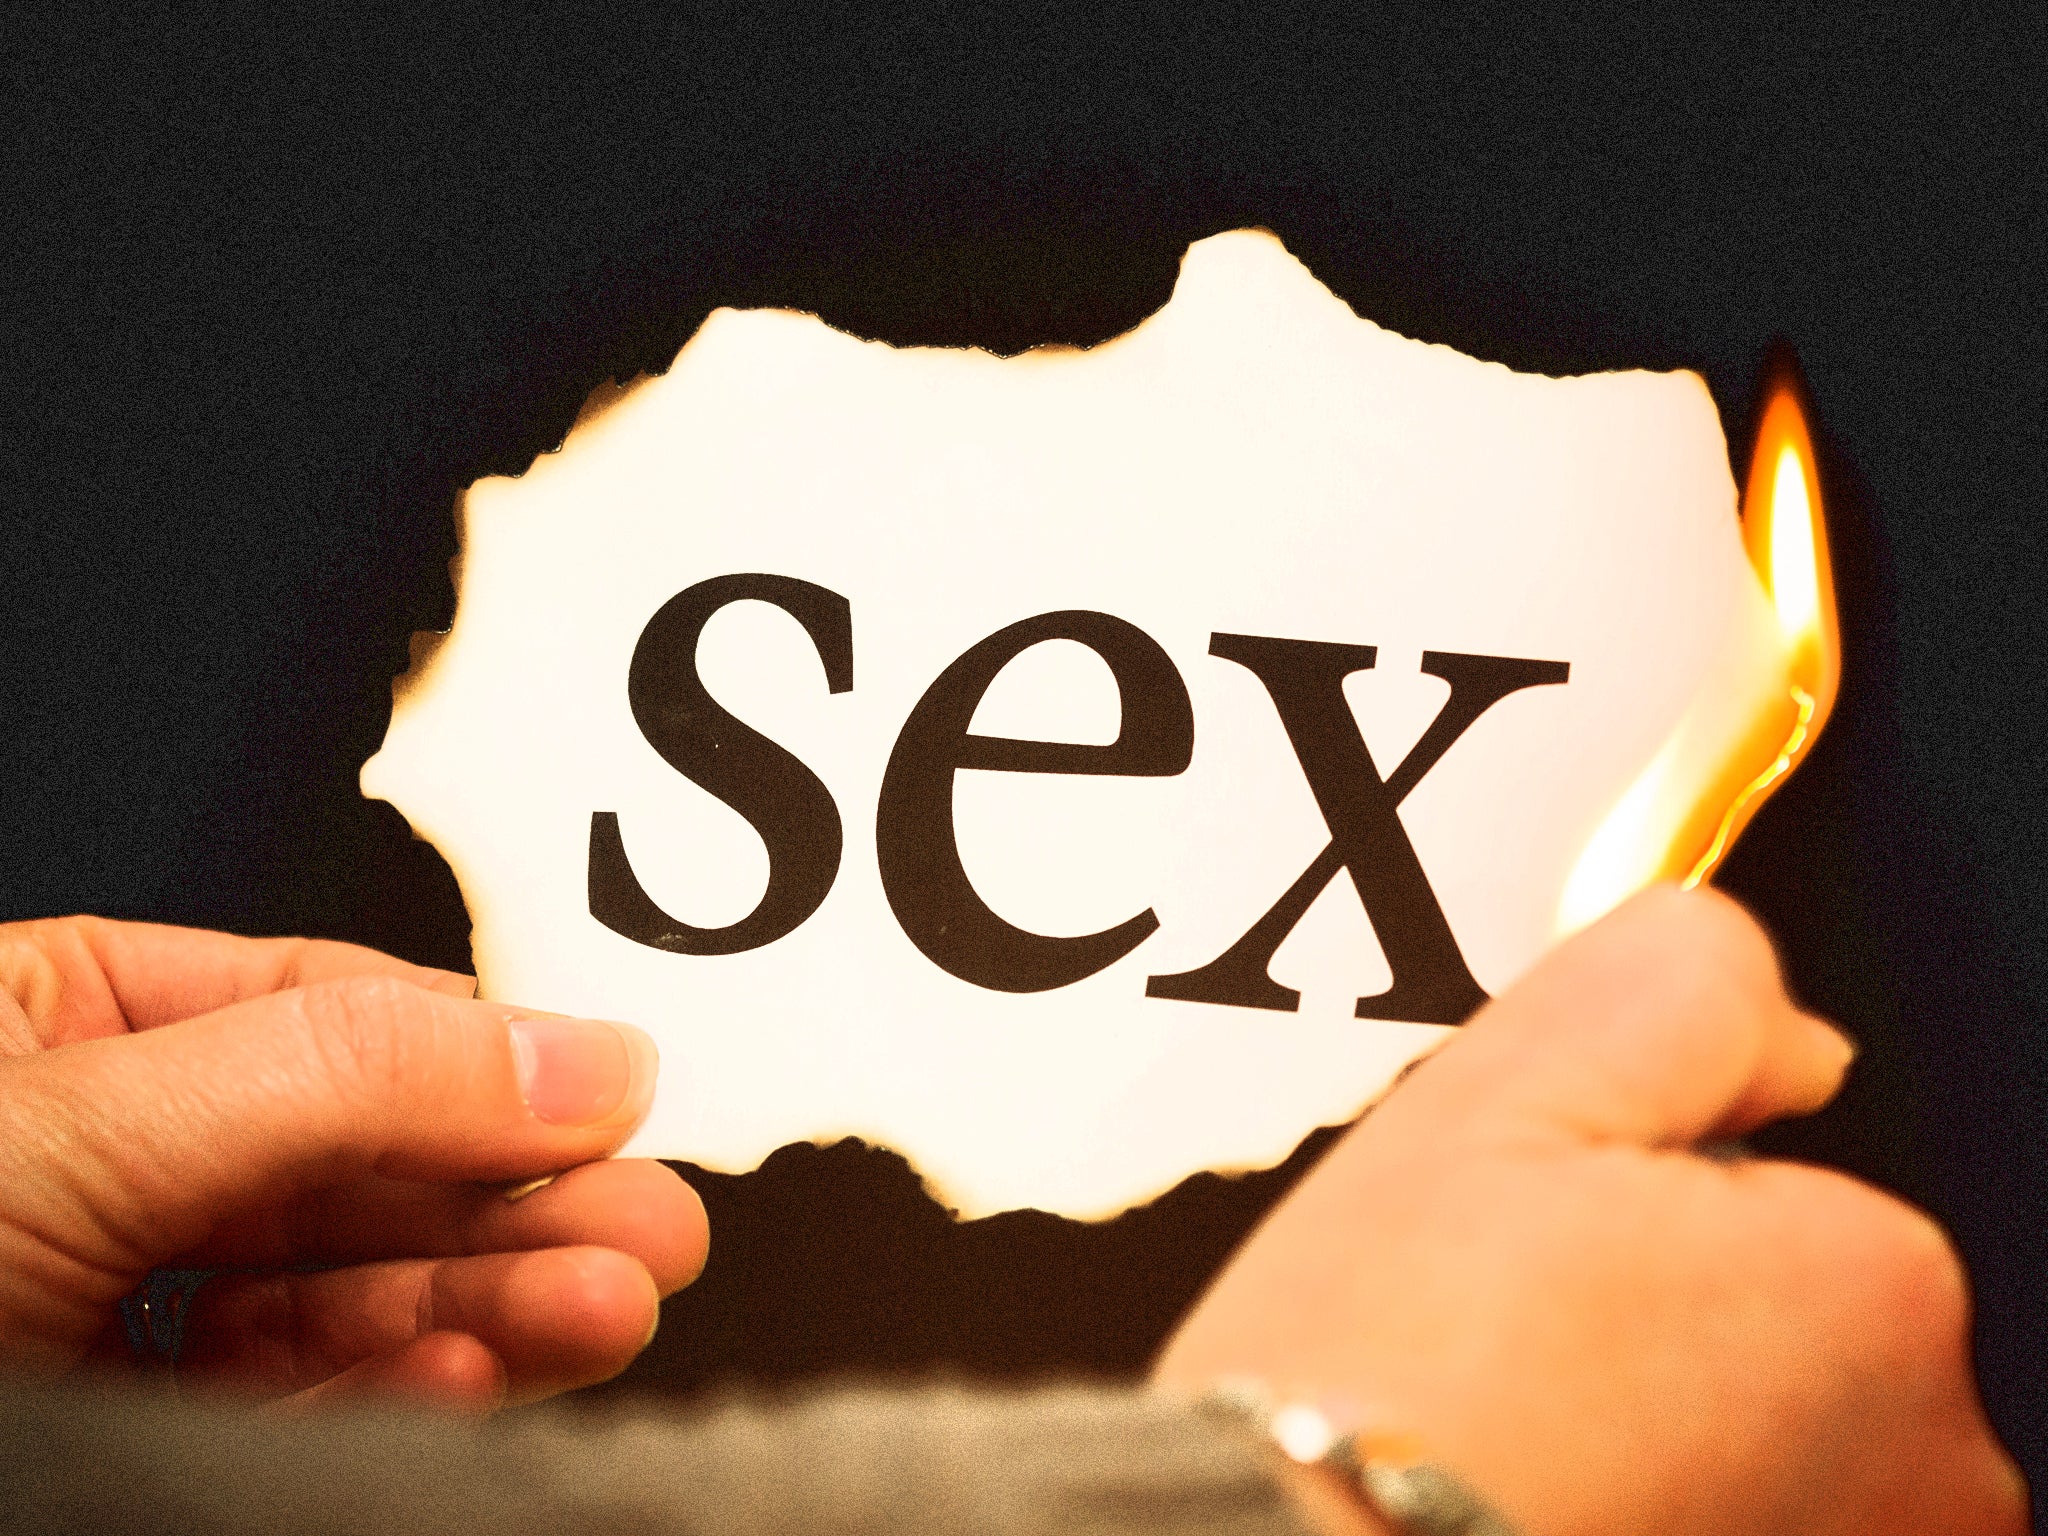 Search ‘celibacy 2023’ on Twitter and you’ll see thousands of people vowing to start the year sex-free